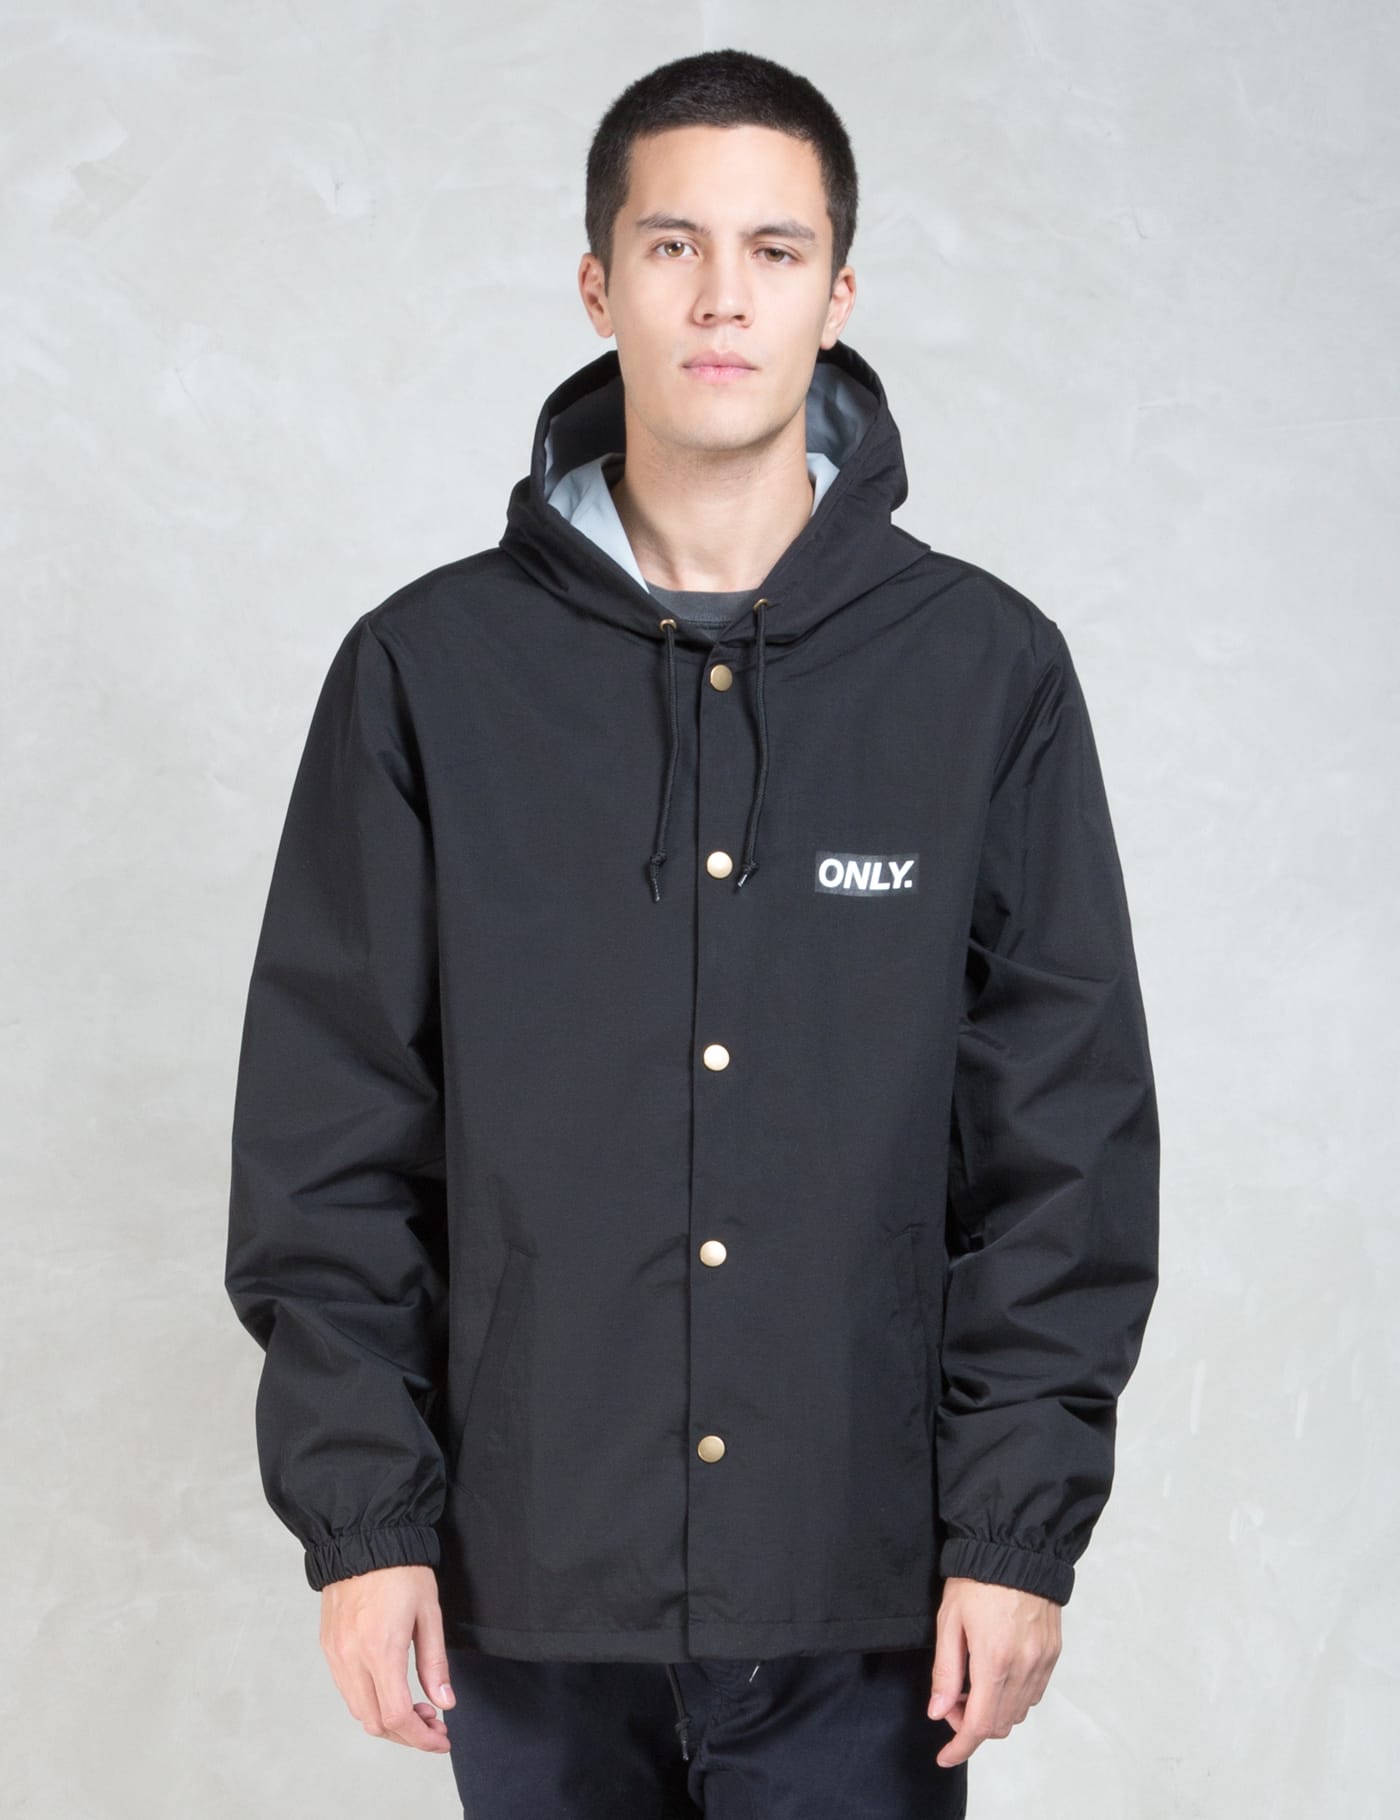 Only Ny   City Coach Jacket   HBX   Globally Curated Fashion and